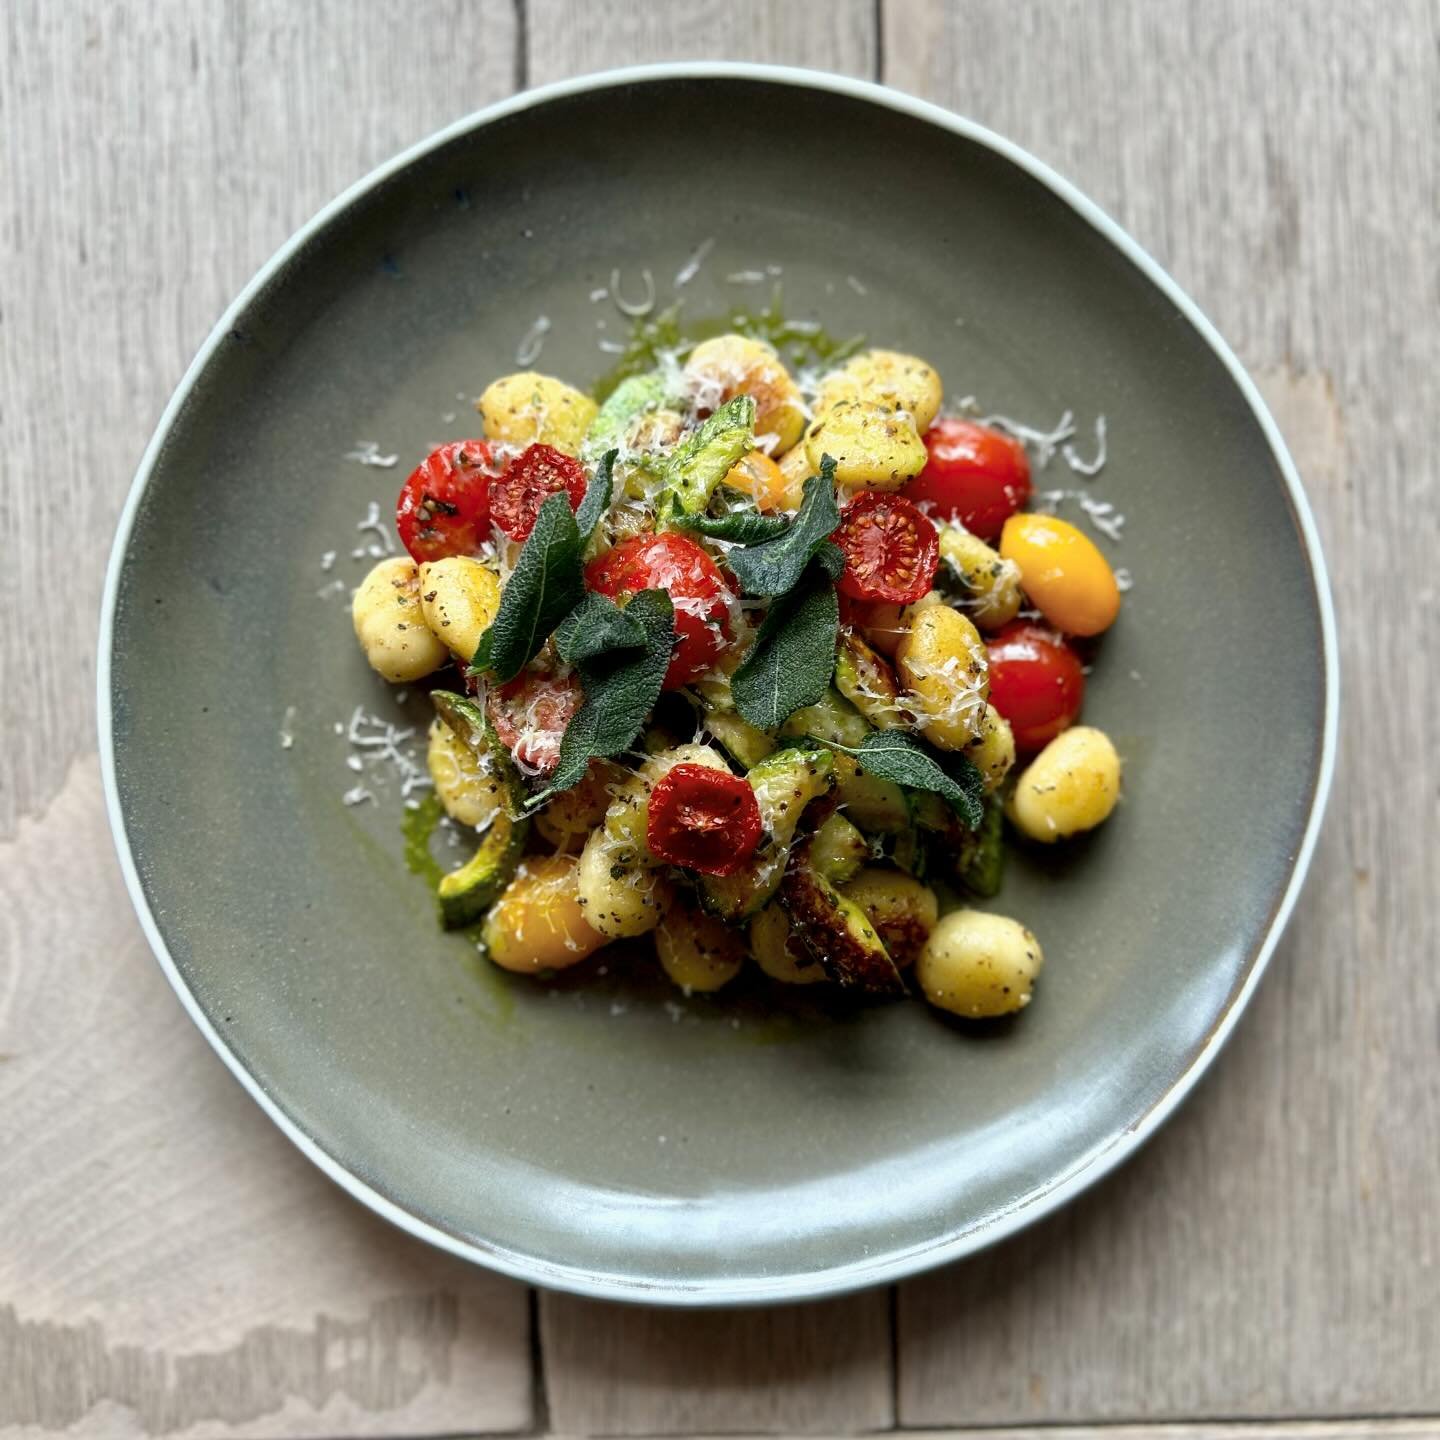 🍝Fresh Pasta?

🤤Who fancies some homemade pasta? Well you&rsquo;re in luck! Because now at @theeastonclerkenwell we are doing some beautiful spring pasta offerings&hellip; whether it be Gnocchi or an egg yolk Raviolo - we&rsquo;ve got you covered l